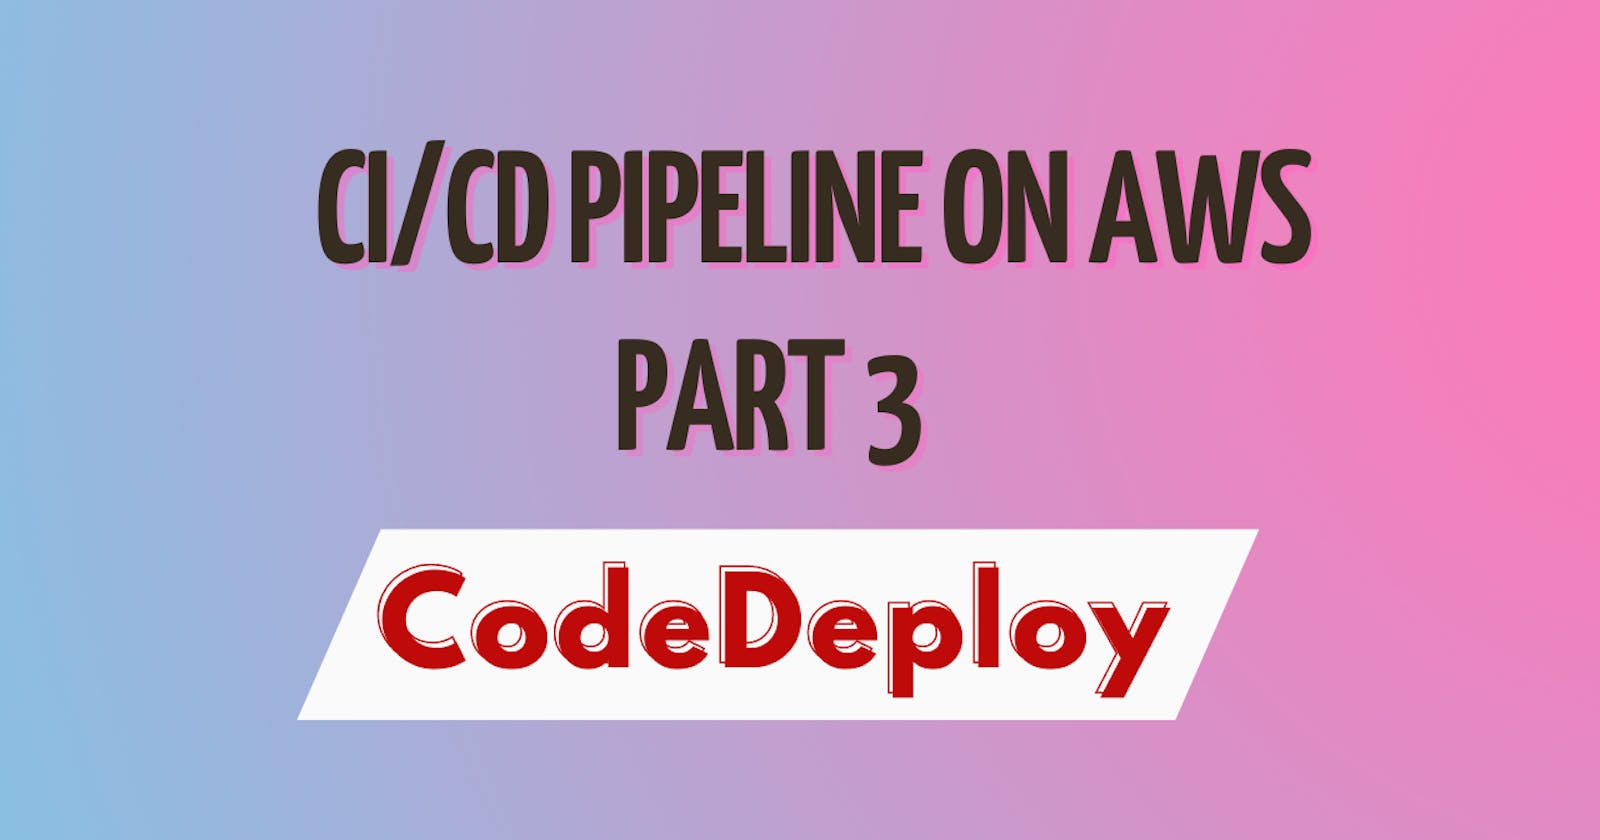 CI/CD pipeline on AWS (Part - 3) CodeDeploy